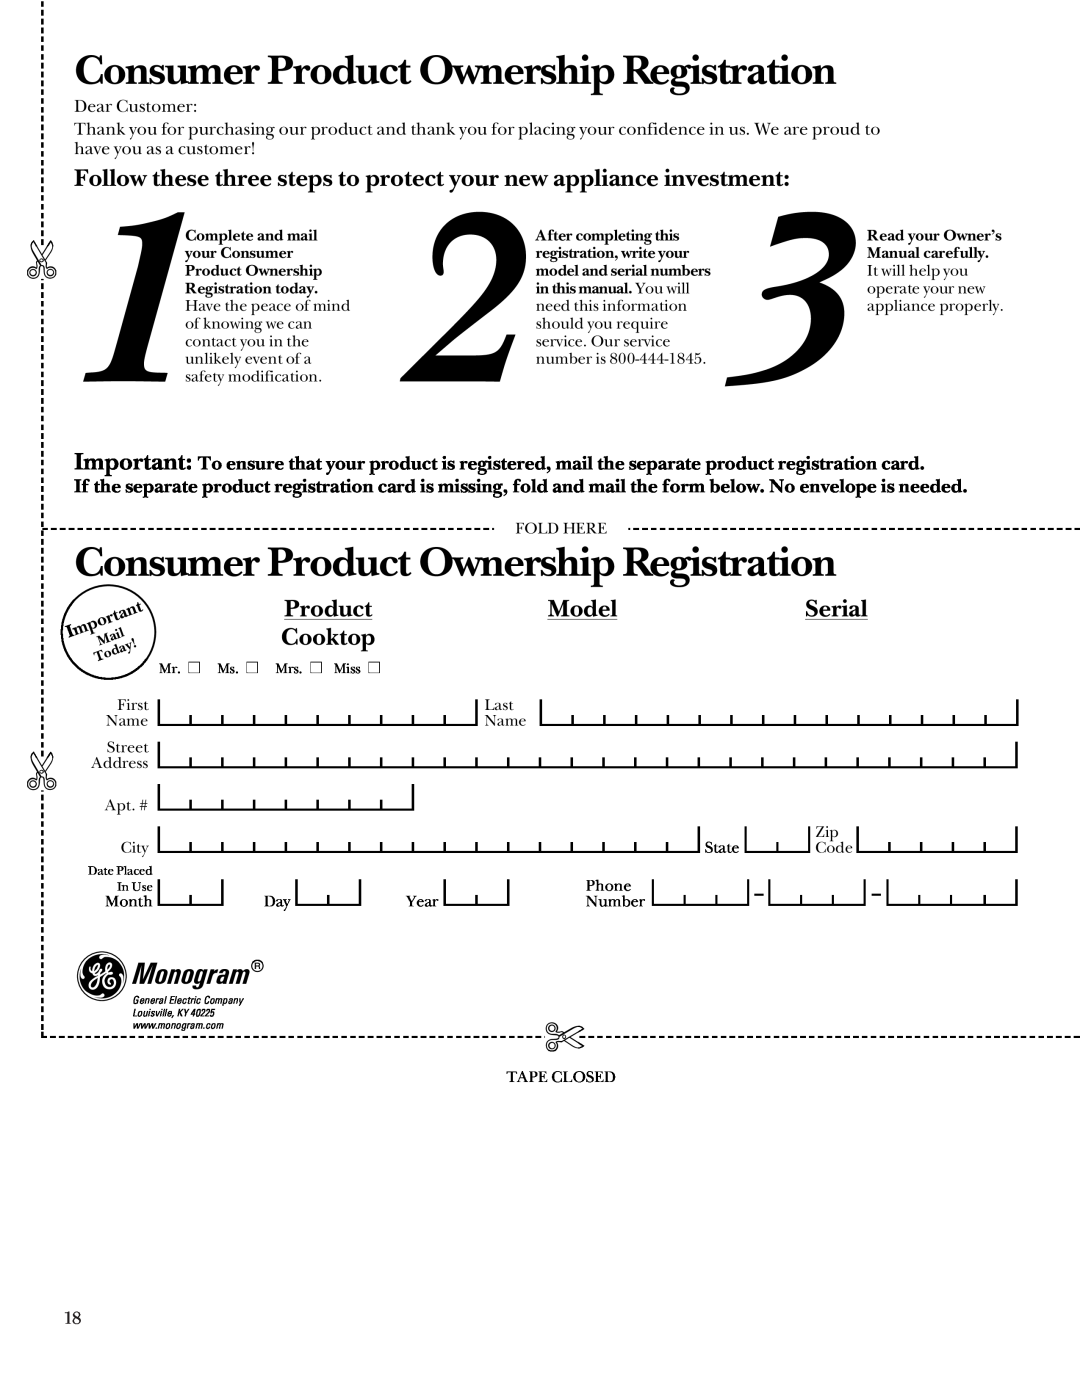 GE 164D3333P235 Consumer Product Ownership Registration, Follow these three steps to protect your new appliance investment 